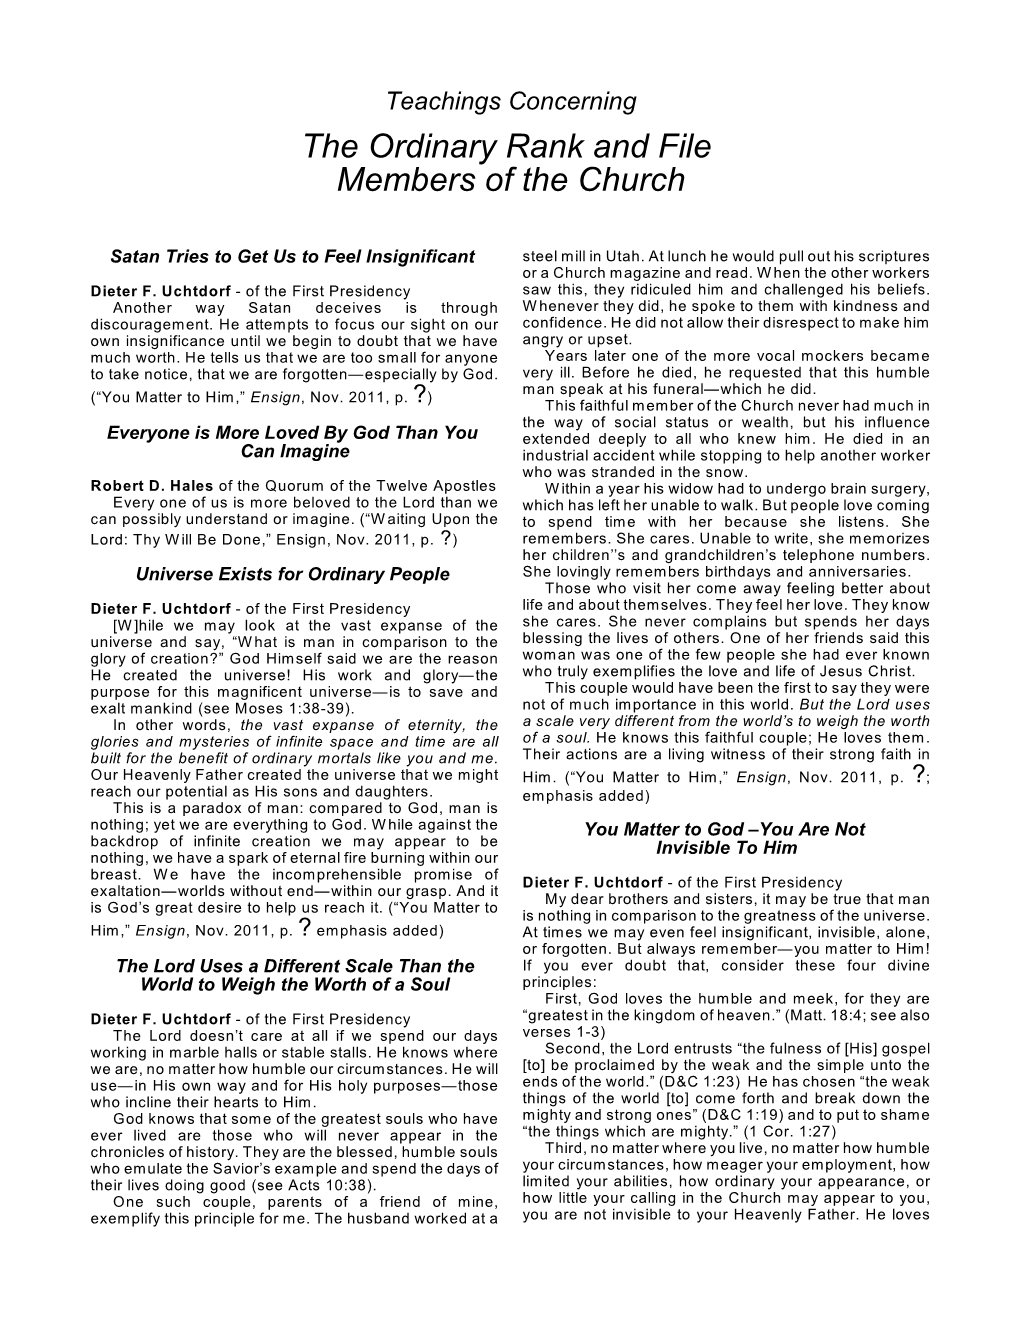 The Ordinary Rank and File Members of the Church